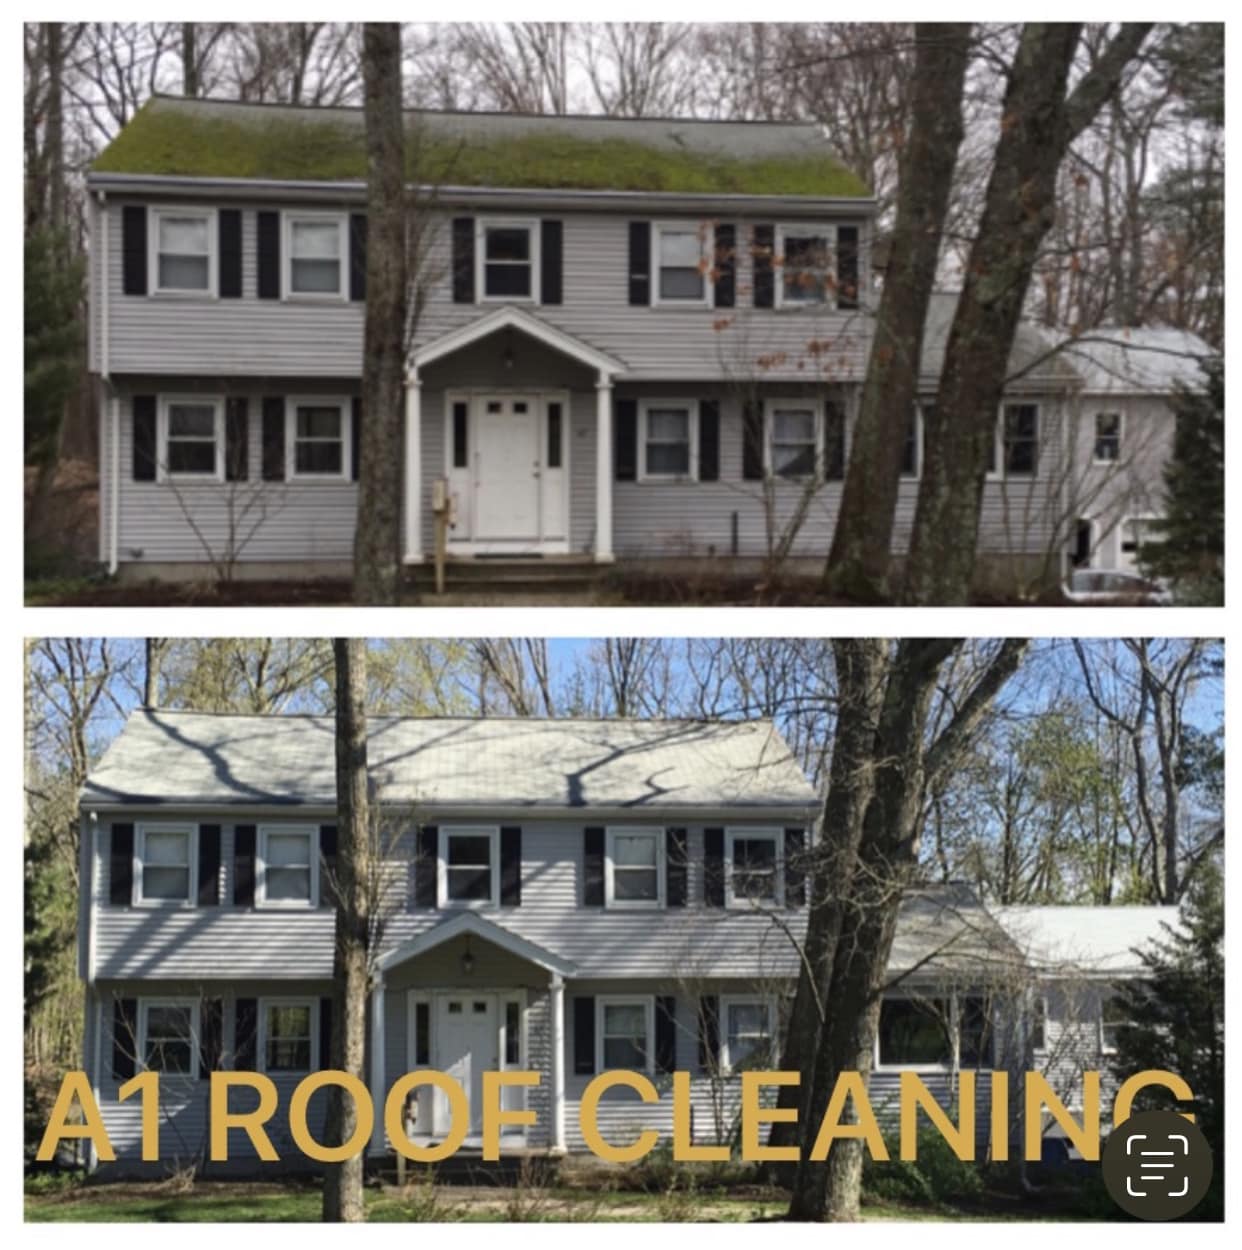 A1 Roof Cleaning 3 Moulton Rd, Southborough Massachusetts 01772